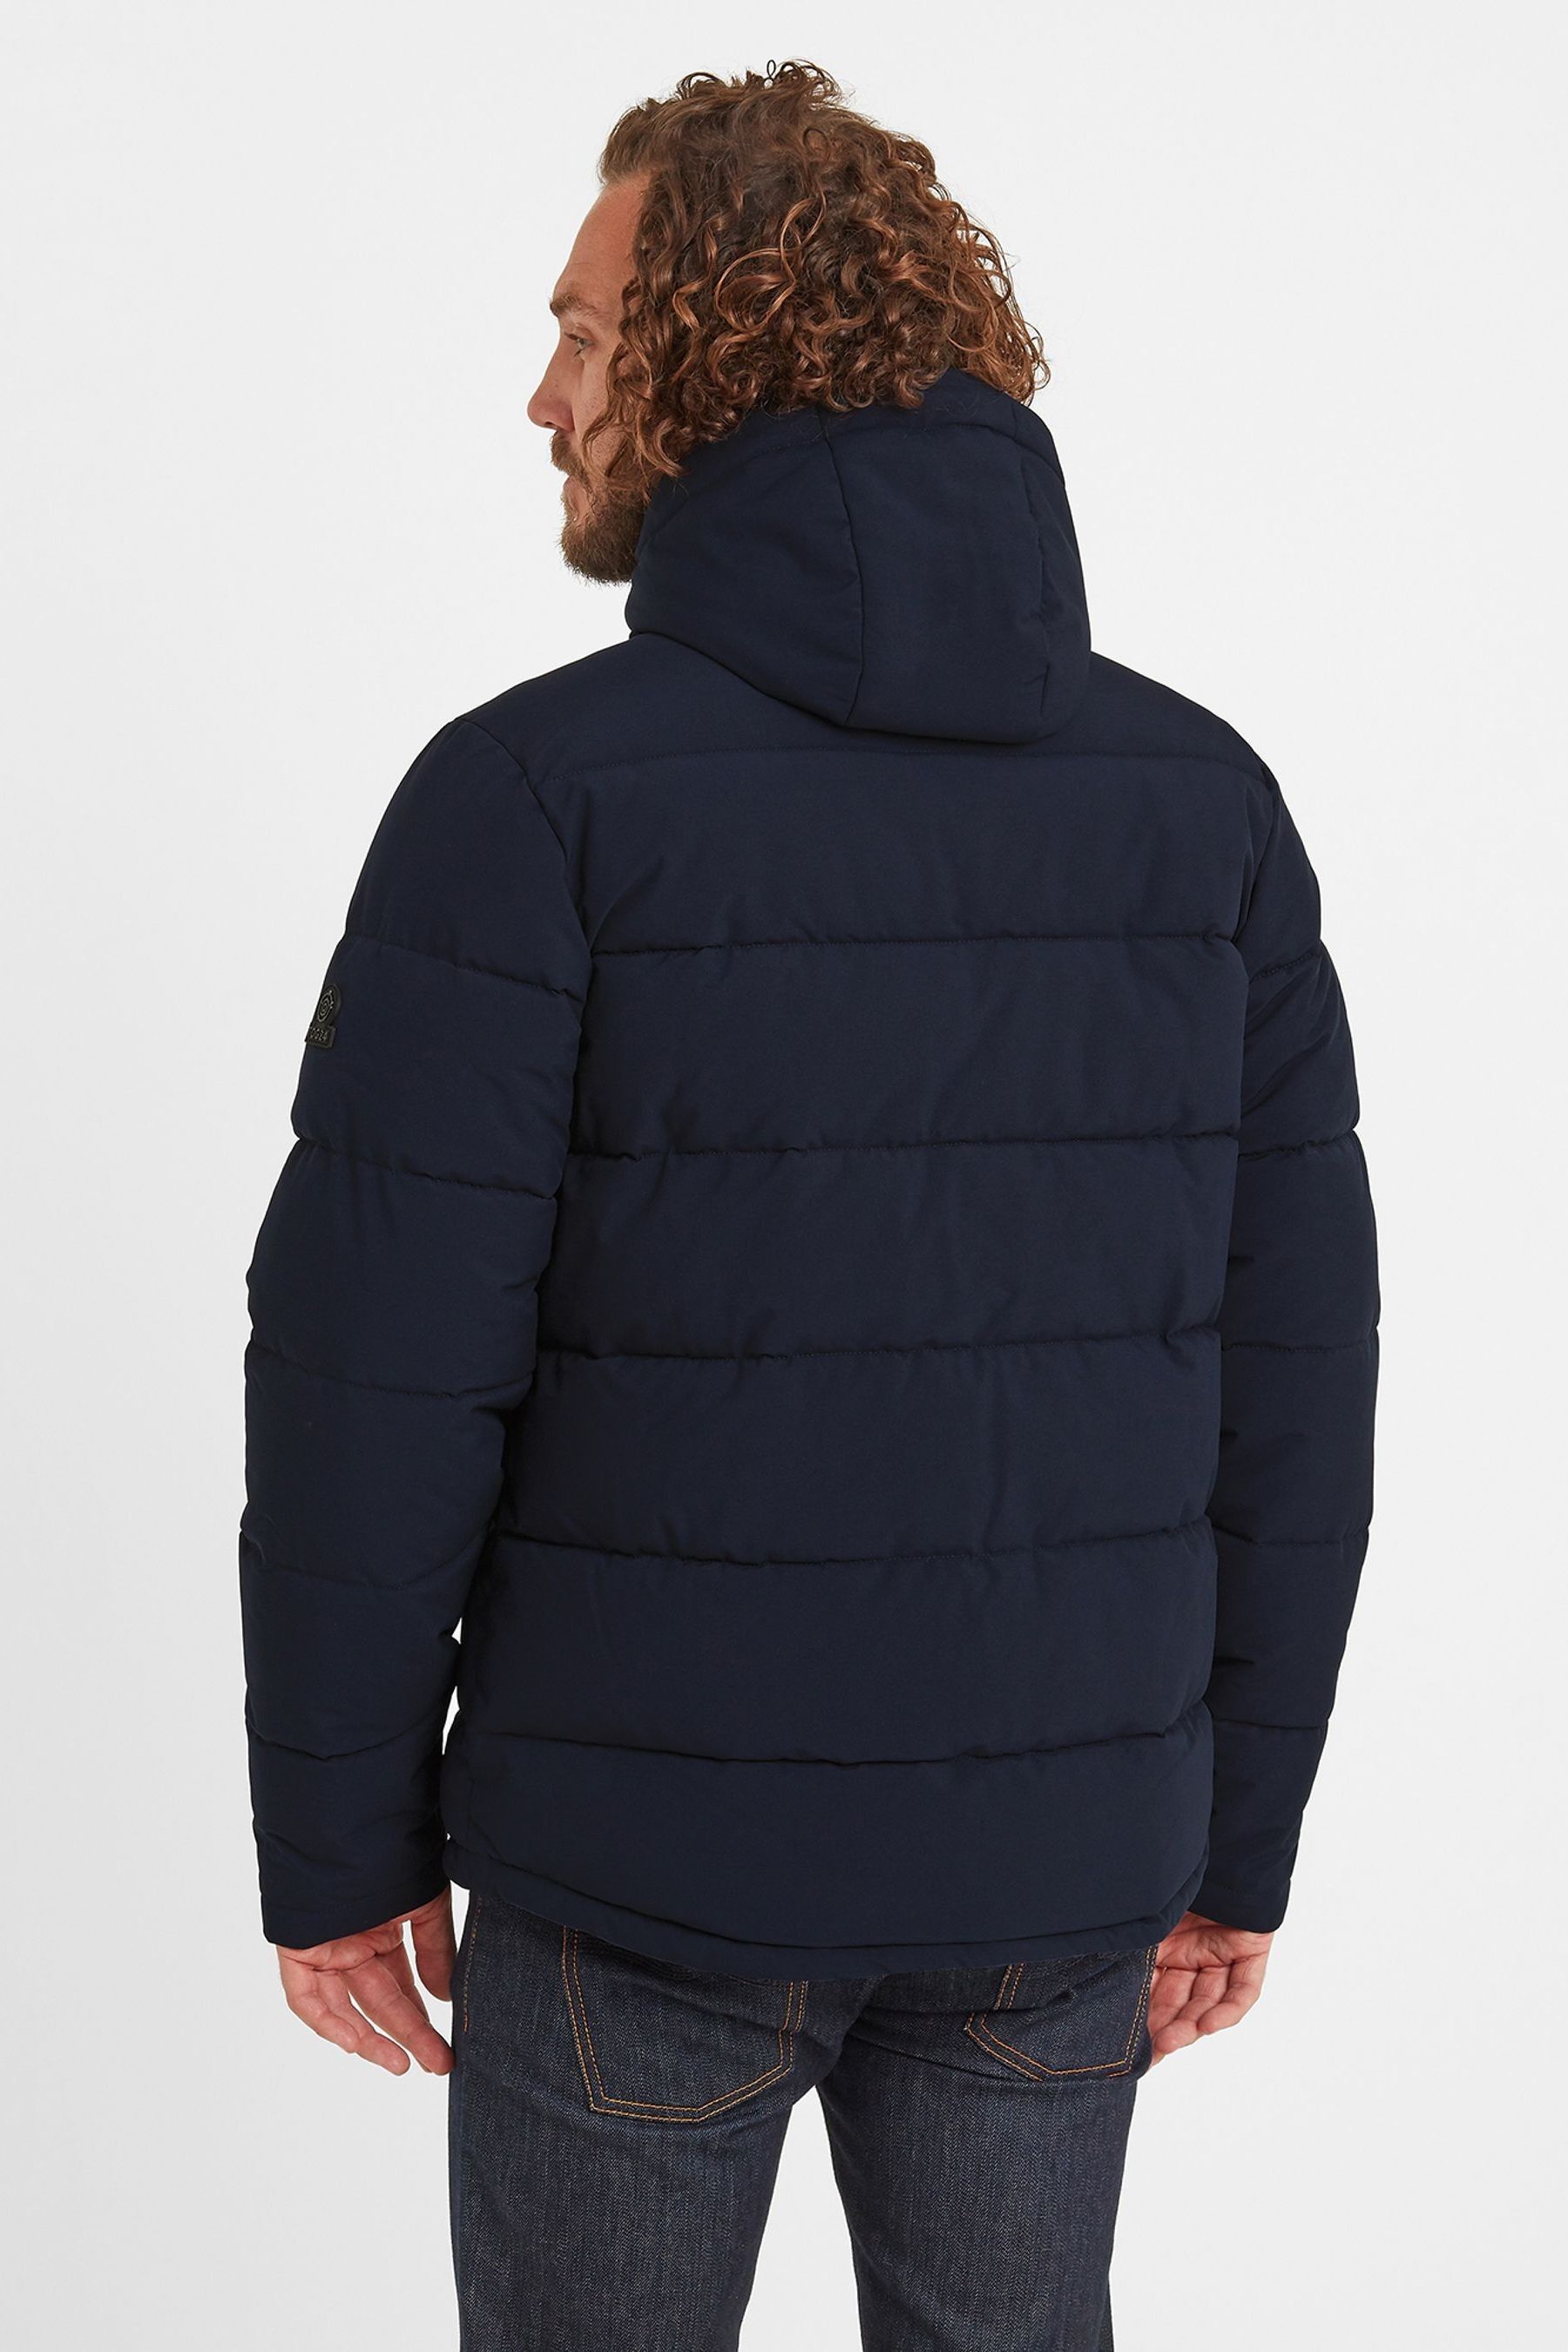 Buy Tog 24 Askham Insulated Mens Jacket from Next Australia